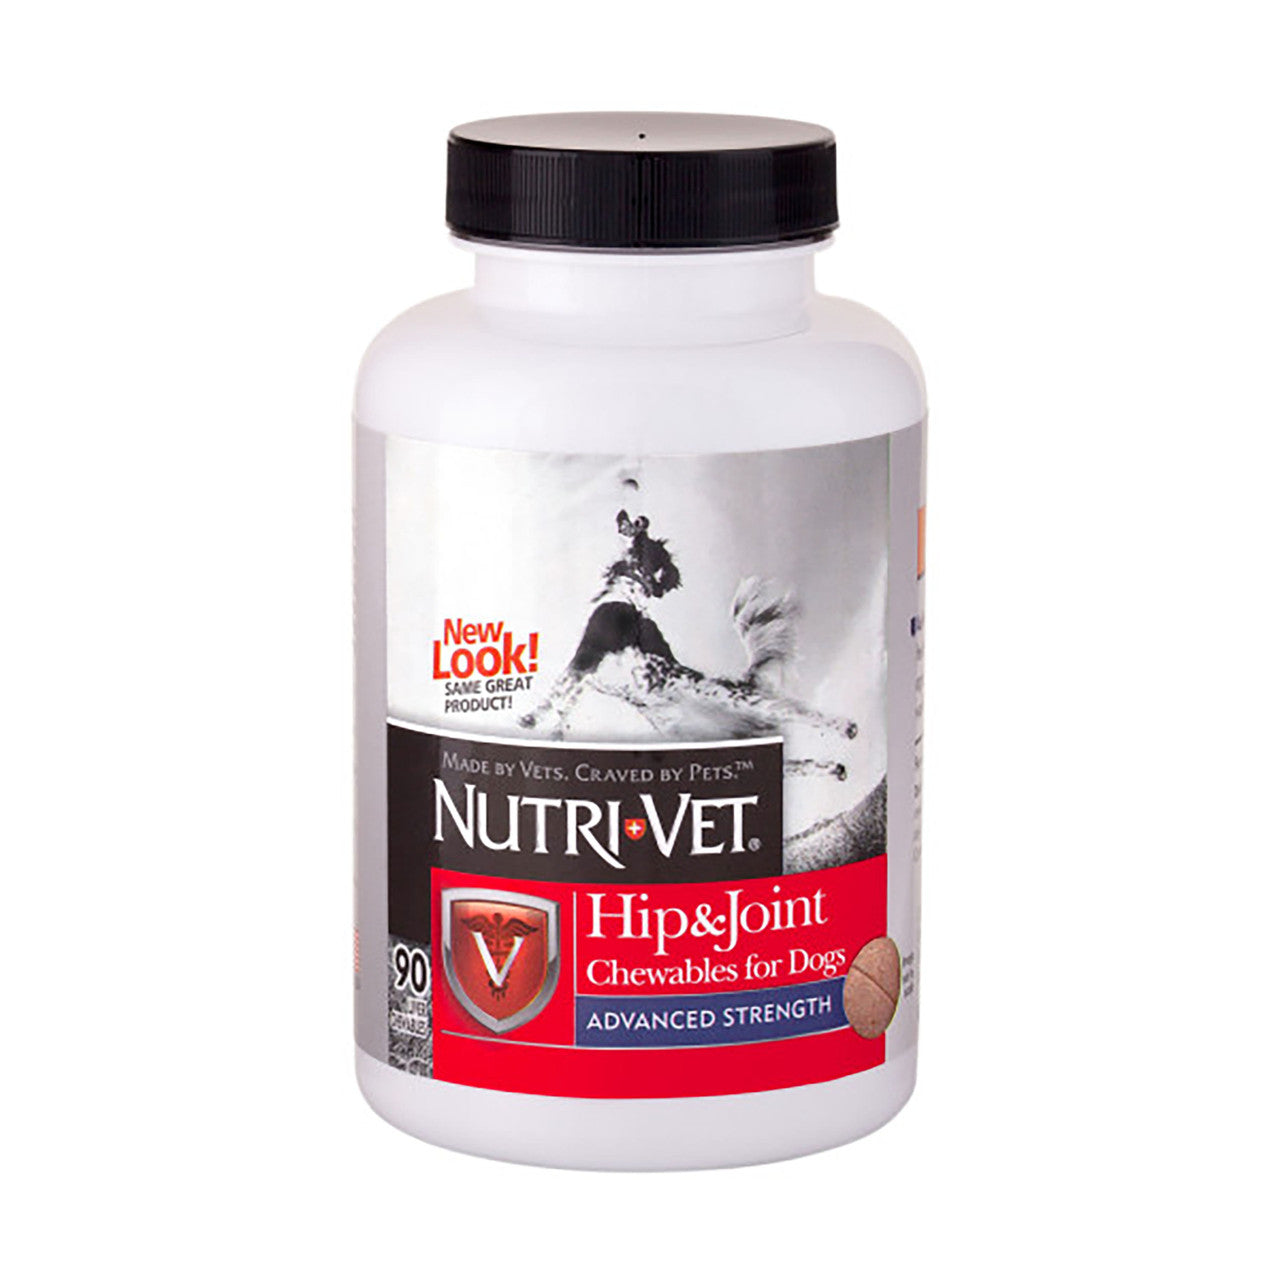 Nutri-Vet Hip & Joint Veterinary Strength Liver Chewables 90 Count